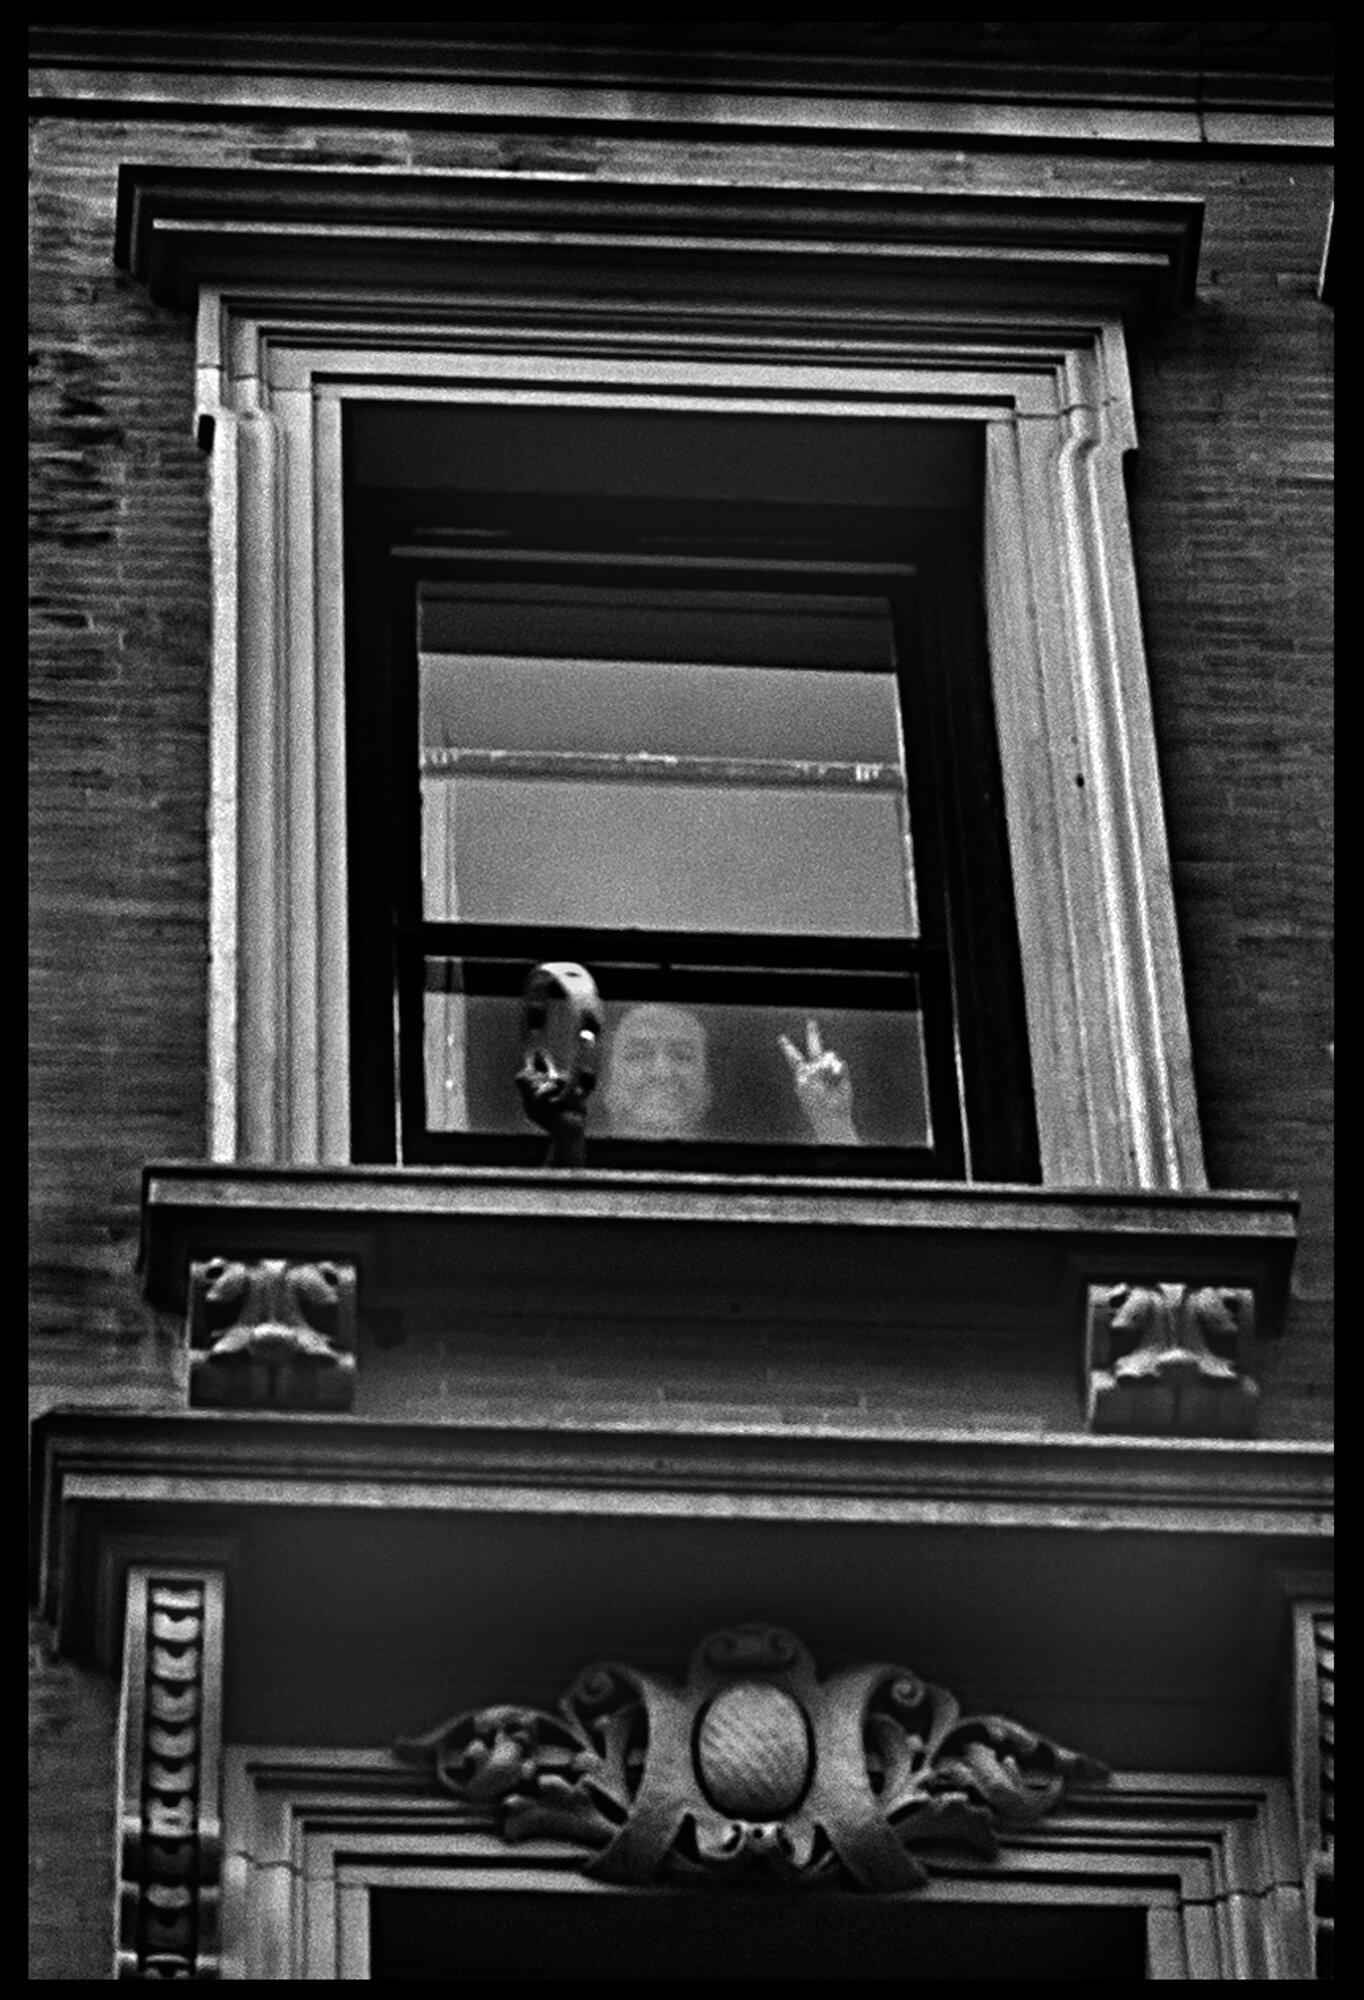  An elder person, making a peace sign from a window in the Upper West Side.  April 12, 2020. © Peter Turnley  ID# 19-003 